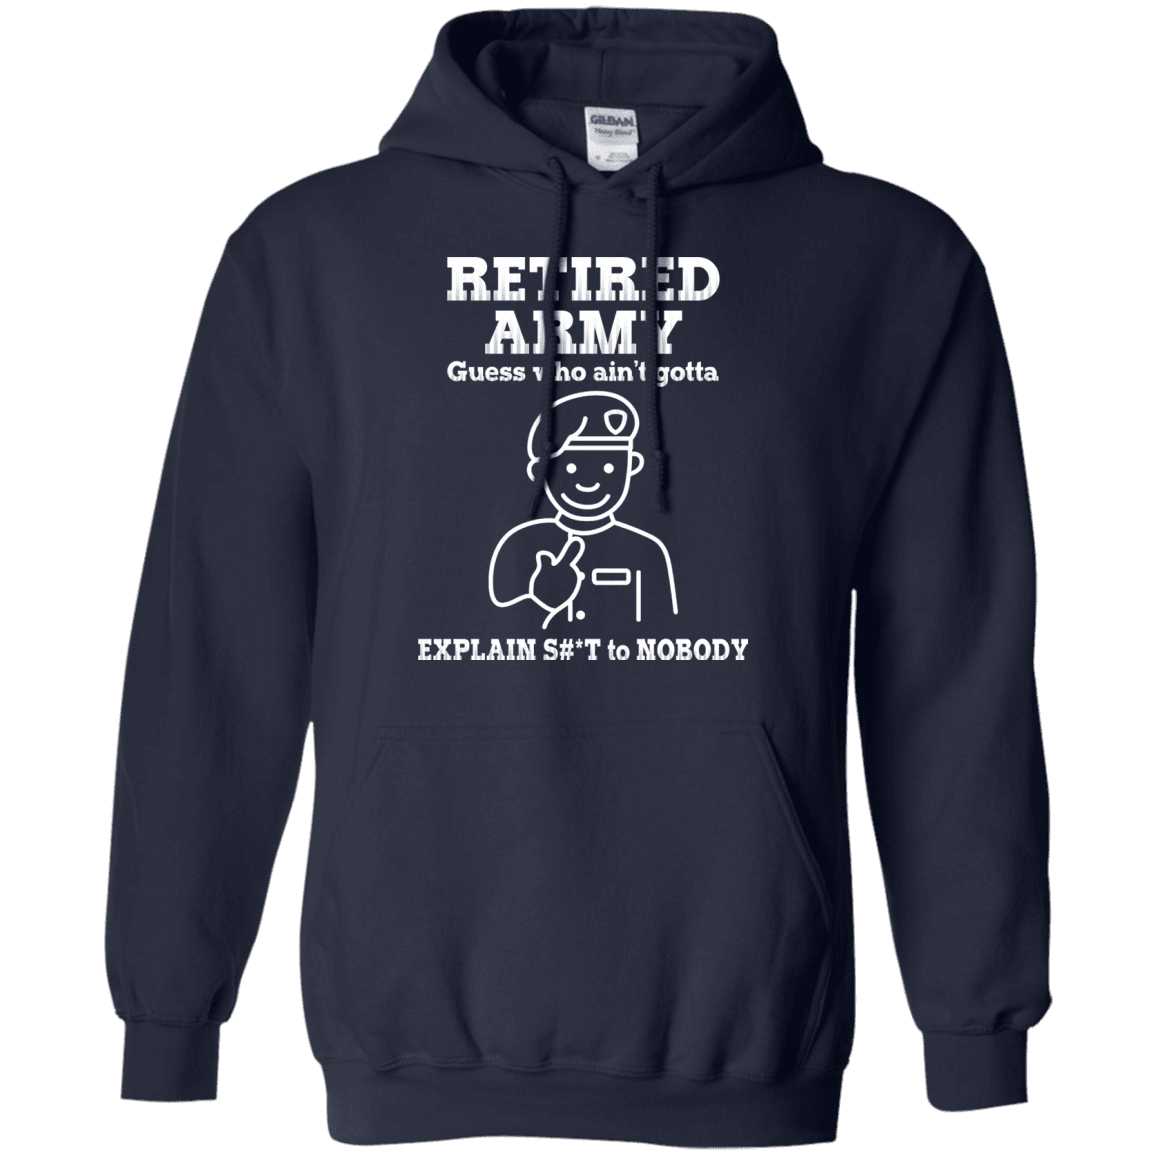 Retired Army Guess Who Ain't gotta Explain Men Front T Shirts-TShirt-Army-Veterans Nation